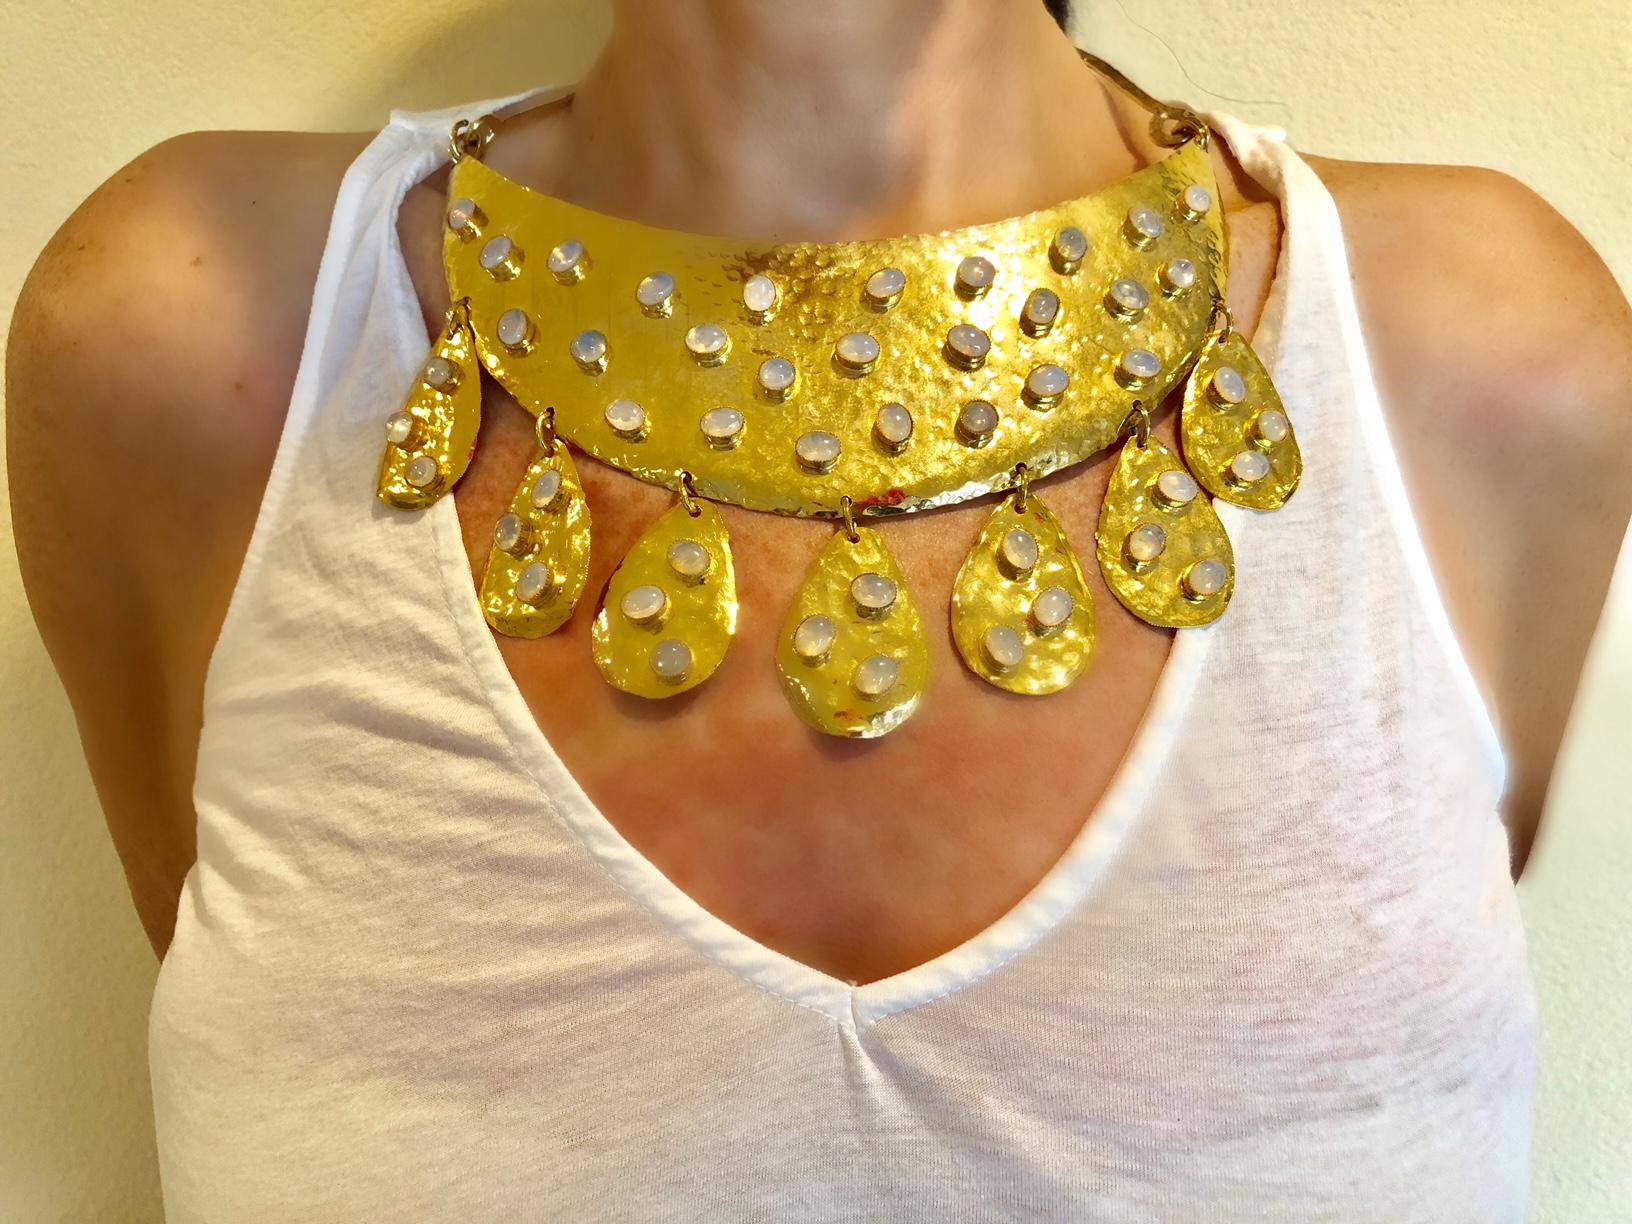  Statement necklace hand constructed by William de Lillo, comprised of hammered 18k gold electroplated brass adorned by German crystal opal cabochons. The sleek and chic necklace has a forceful mid-century modern design that is stylish and current,